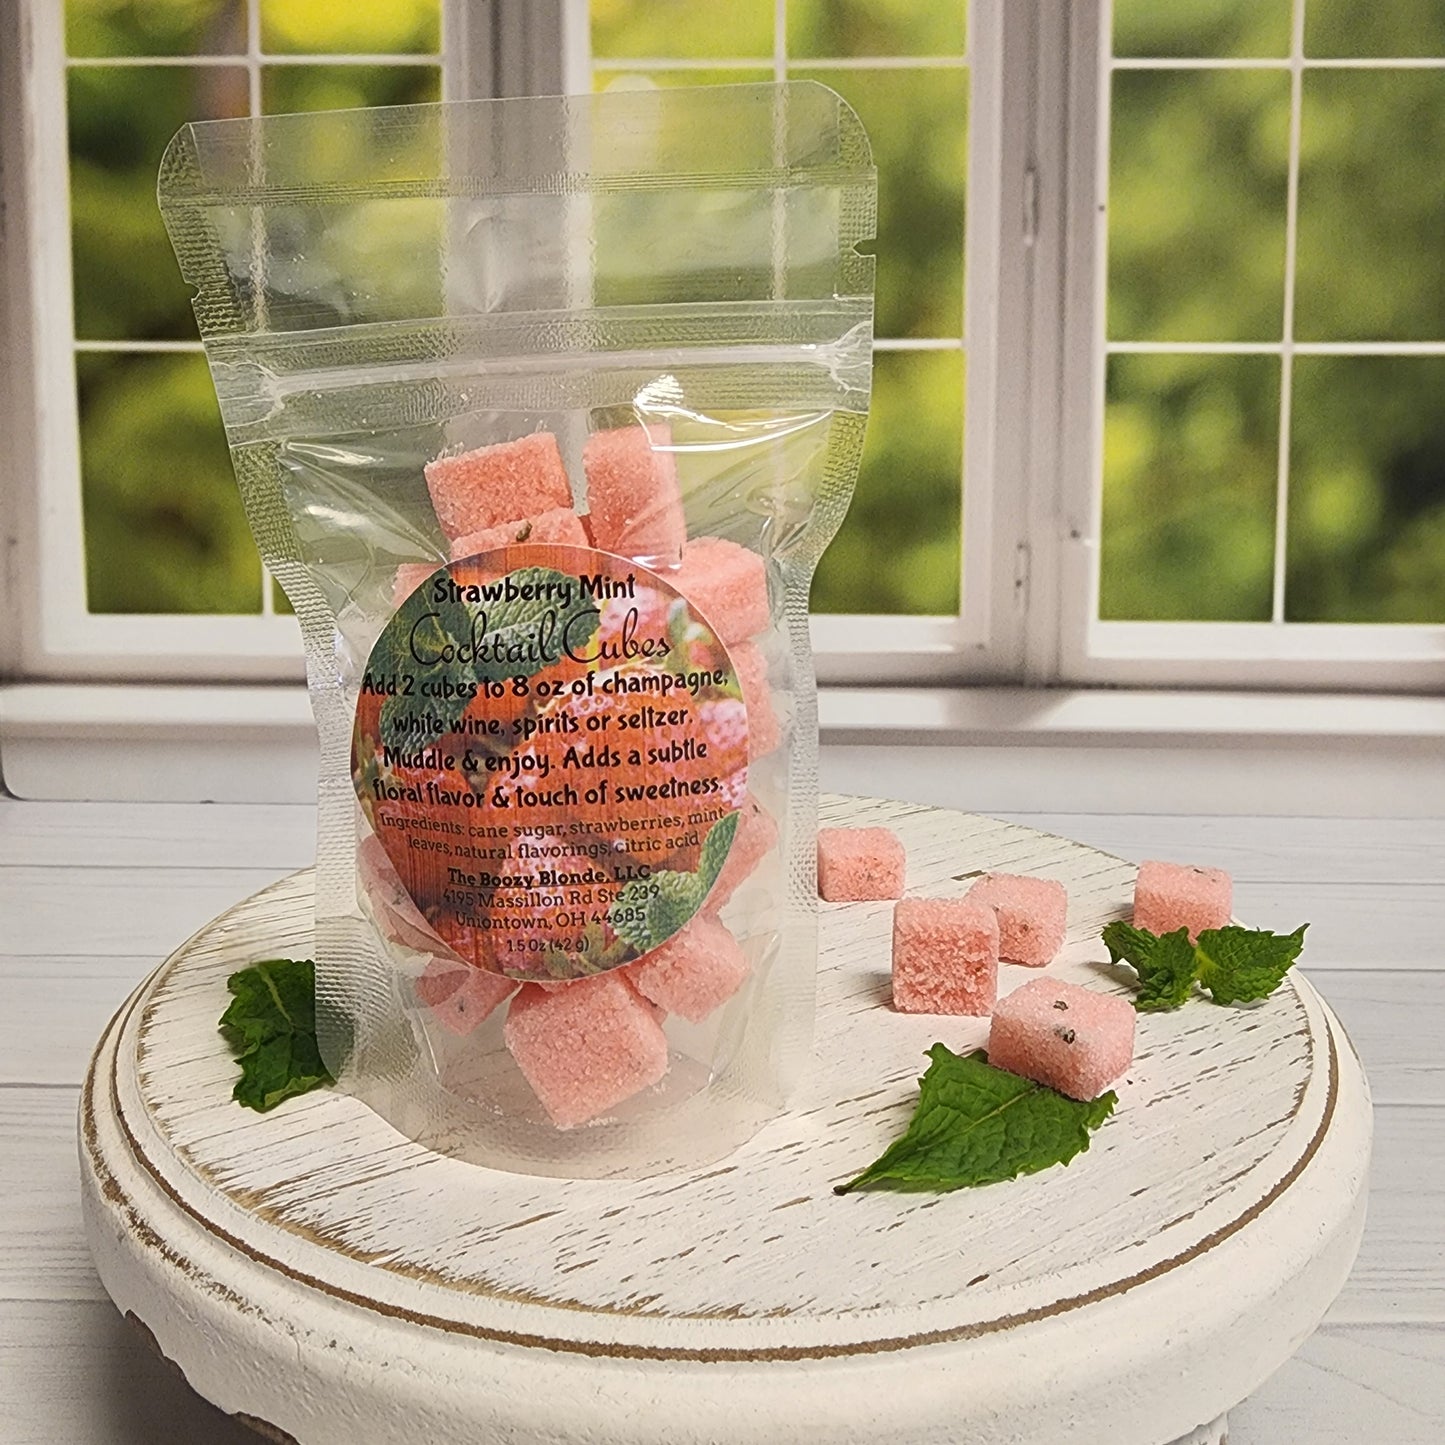 Cocktail Drops - Handmade Infused Sugar Cubes for Drinks